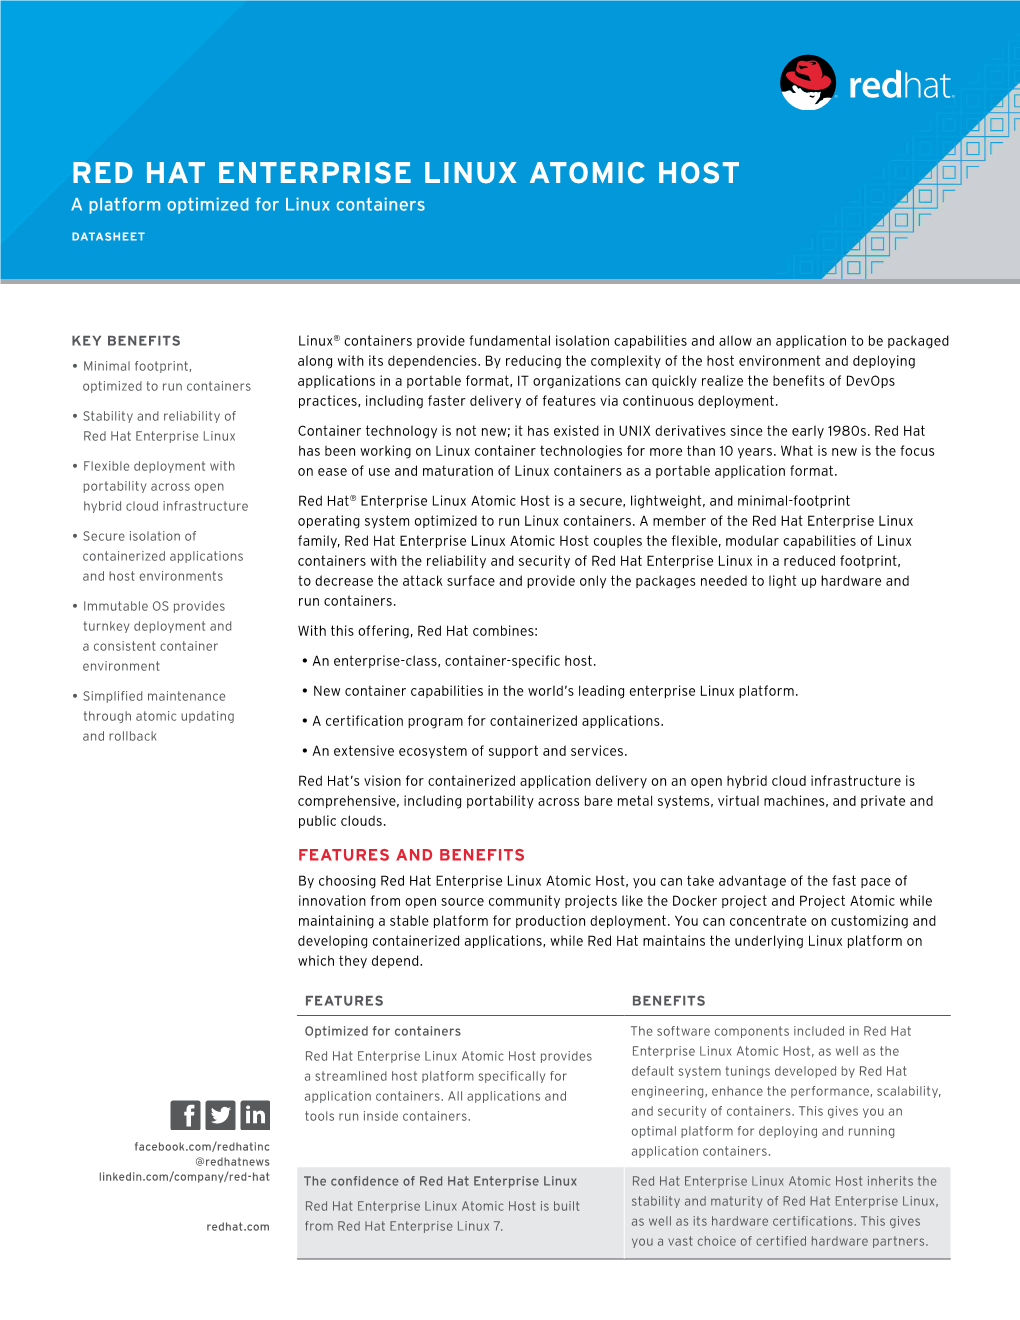 RED HAT ENTERPRISE LINUX ATOMIC HOST a Platform Optimized for Linux Containers